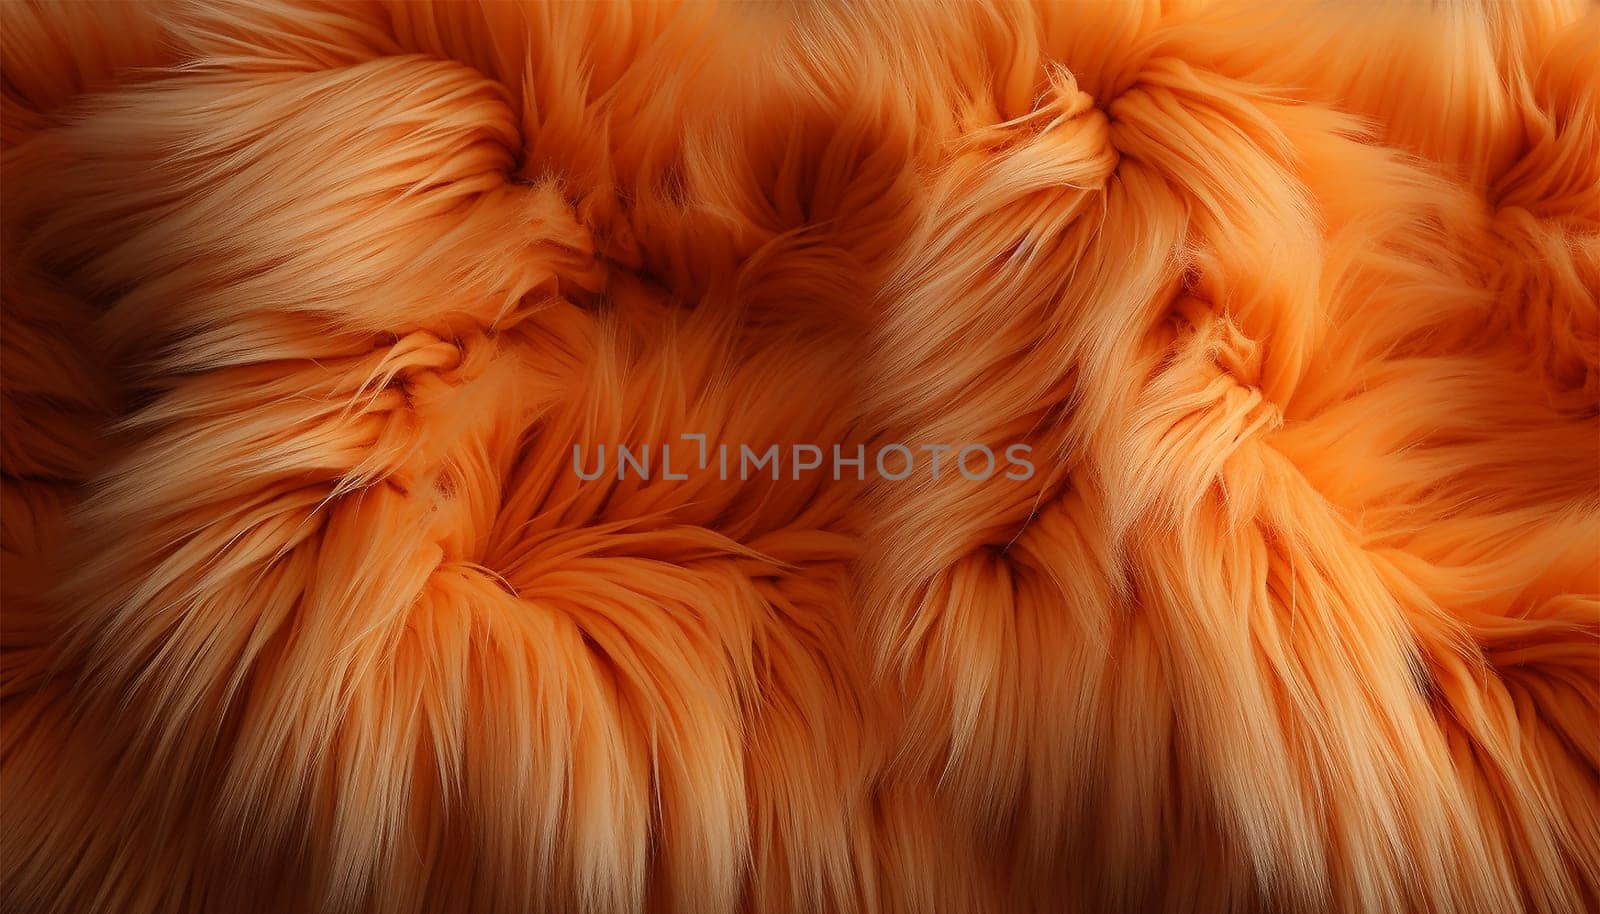 Orange fur background texture Abstract. Bright pastel ginger colored. Textures red fox fur. Red fox shaggy fur texture cloth abstract, furry rusty texture plain surface, rough pelt background in horizontal orientation, nobody. by Annebel146